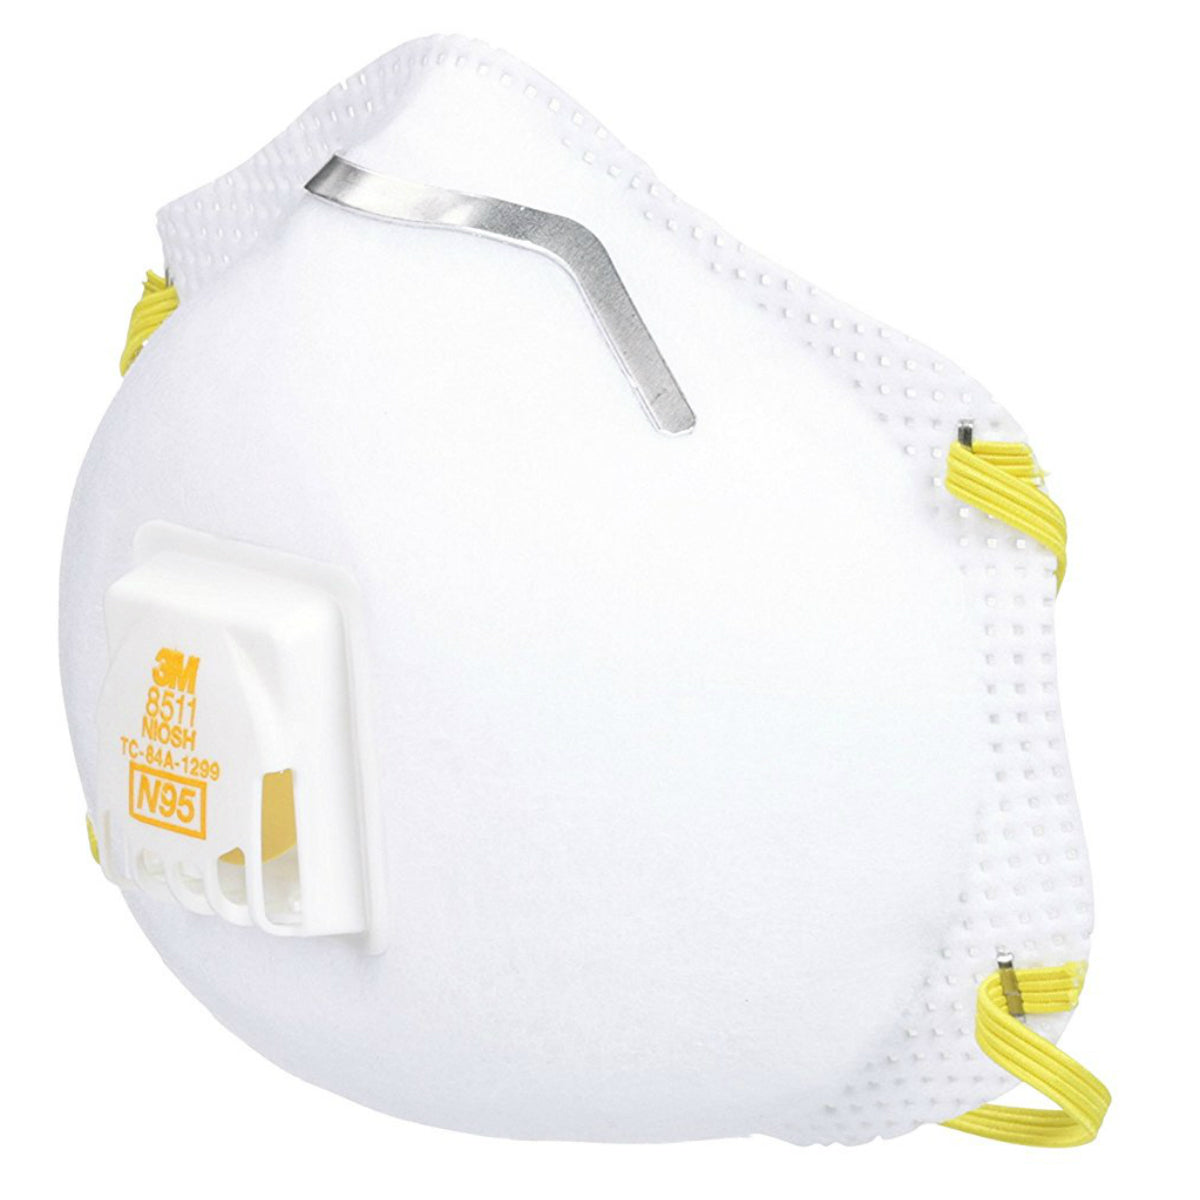 3M 8511 N95 Particulate Respirator Dust Mask with Cool Flow Valve, 10-Pack